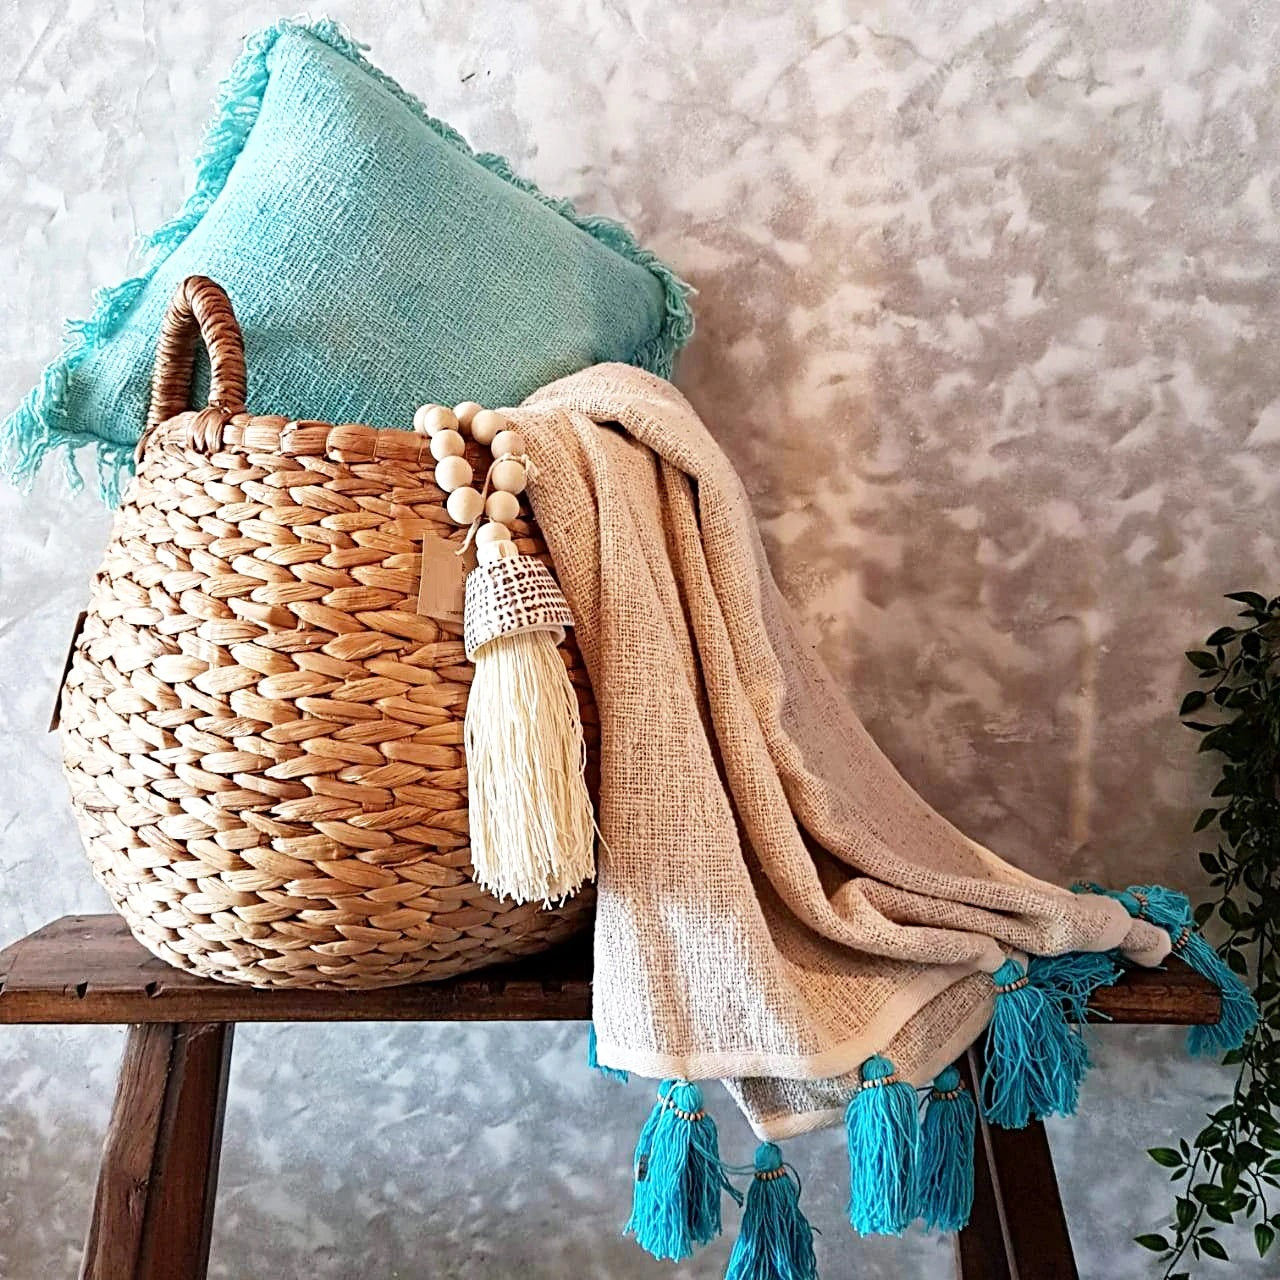 Soft Natural Throw Blanket with Turquoise Tassels